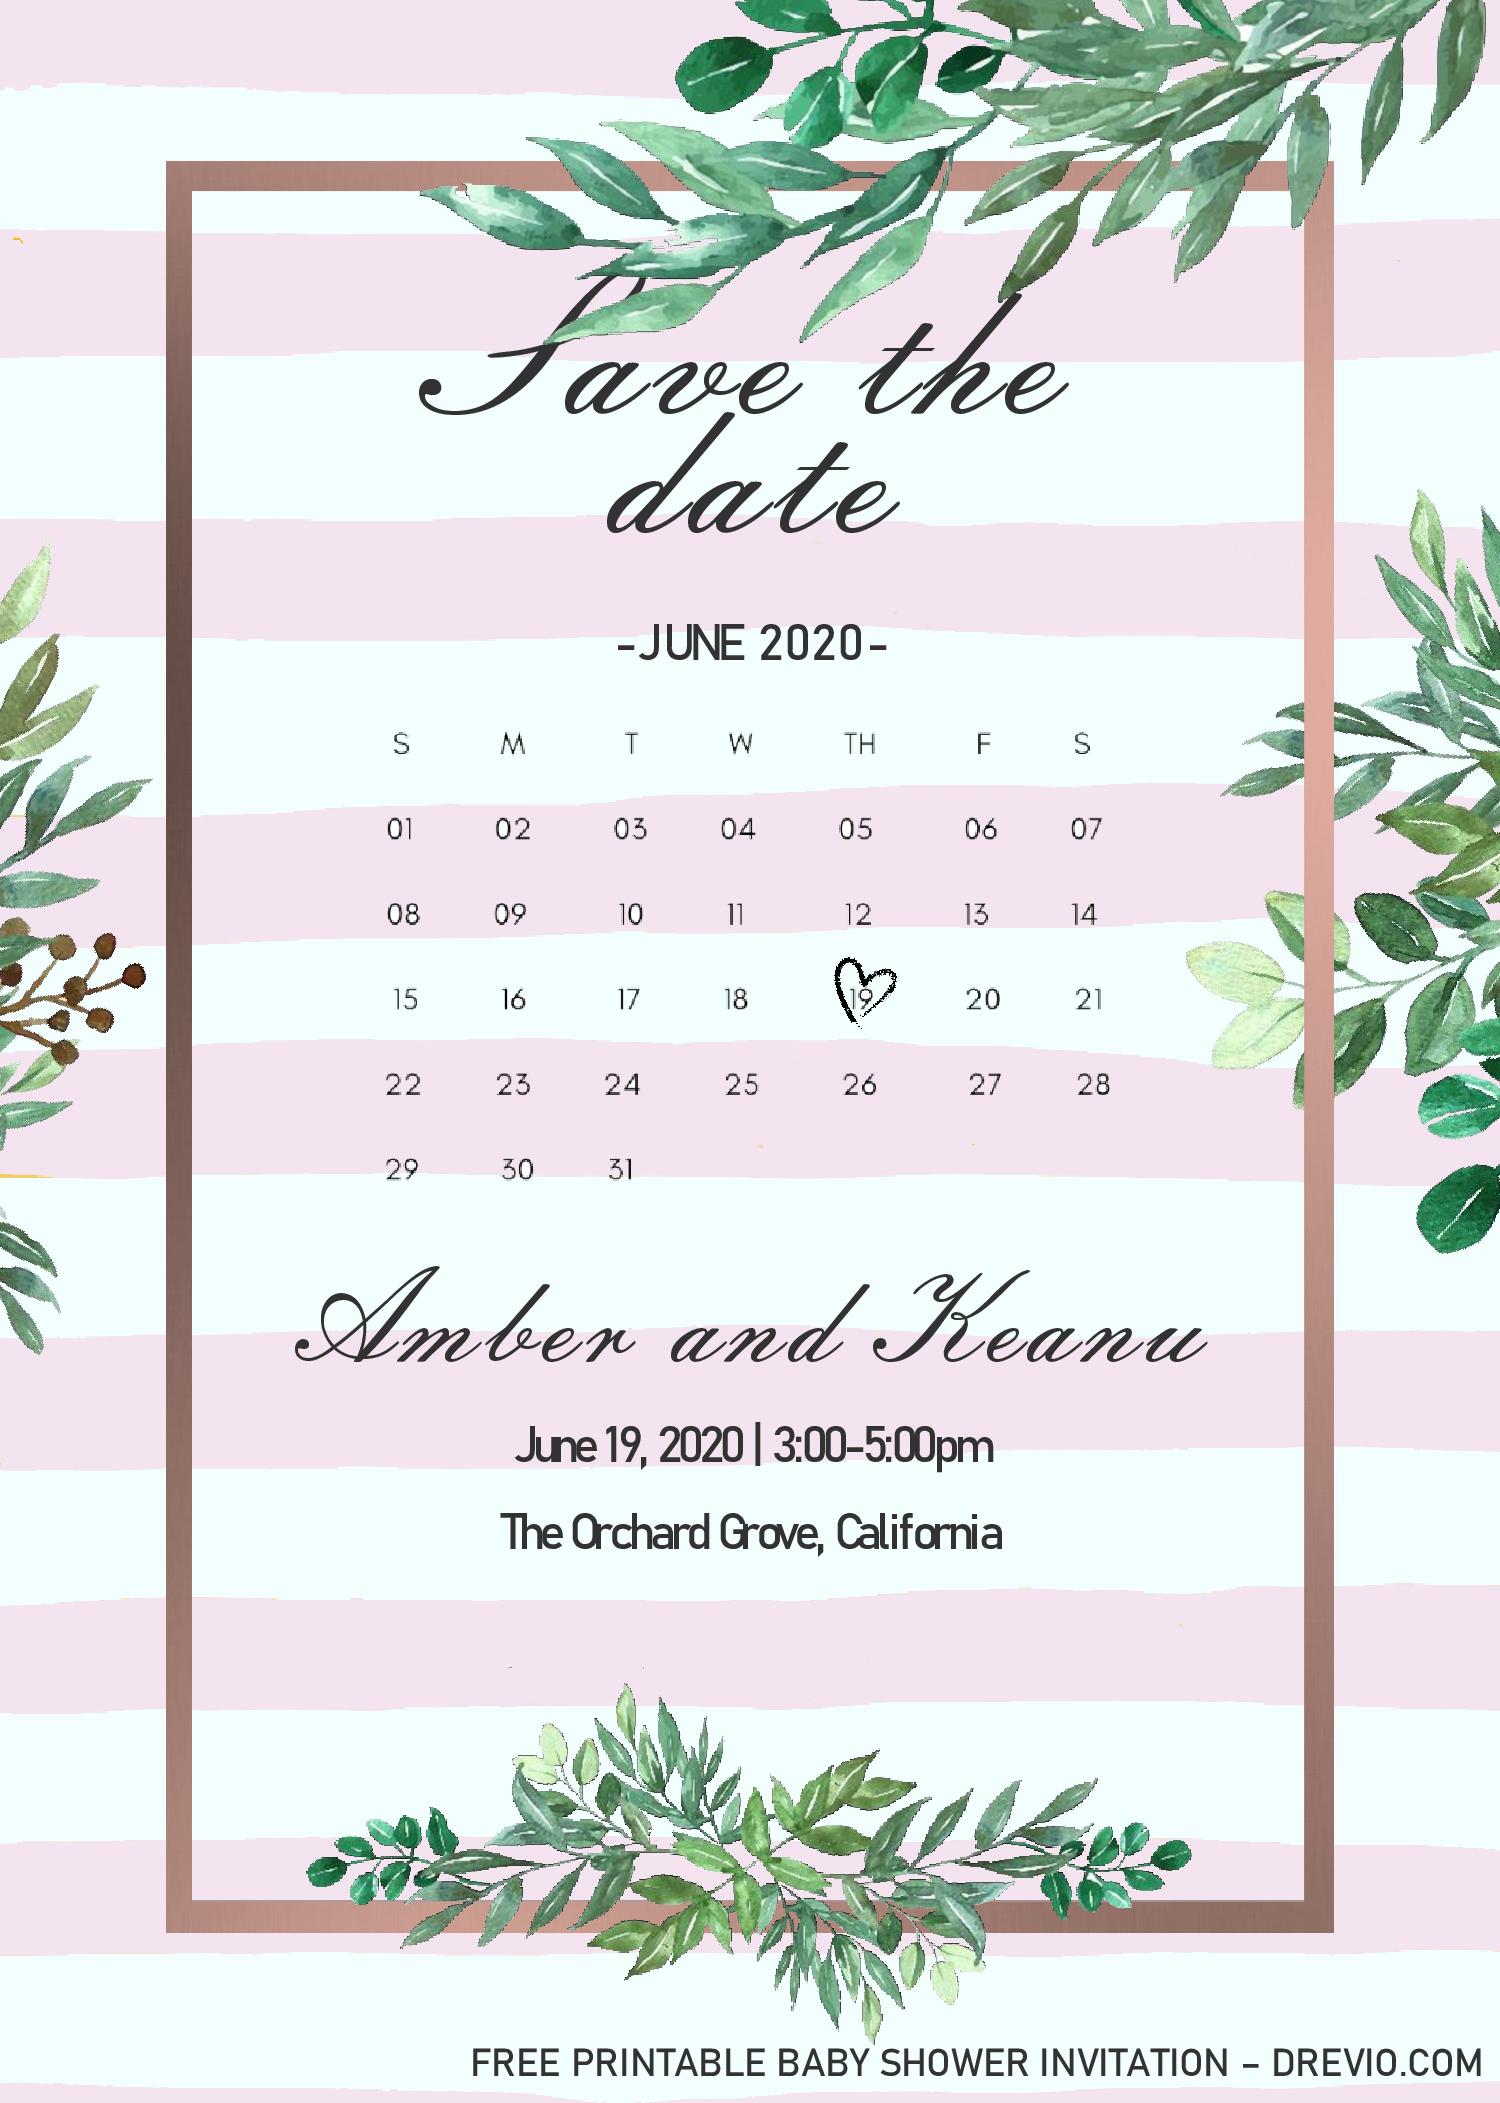 Save The Date E Download Hundreds Free Printable Birthday Invitation Templates Media